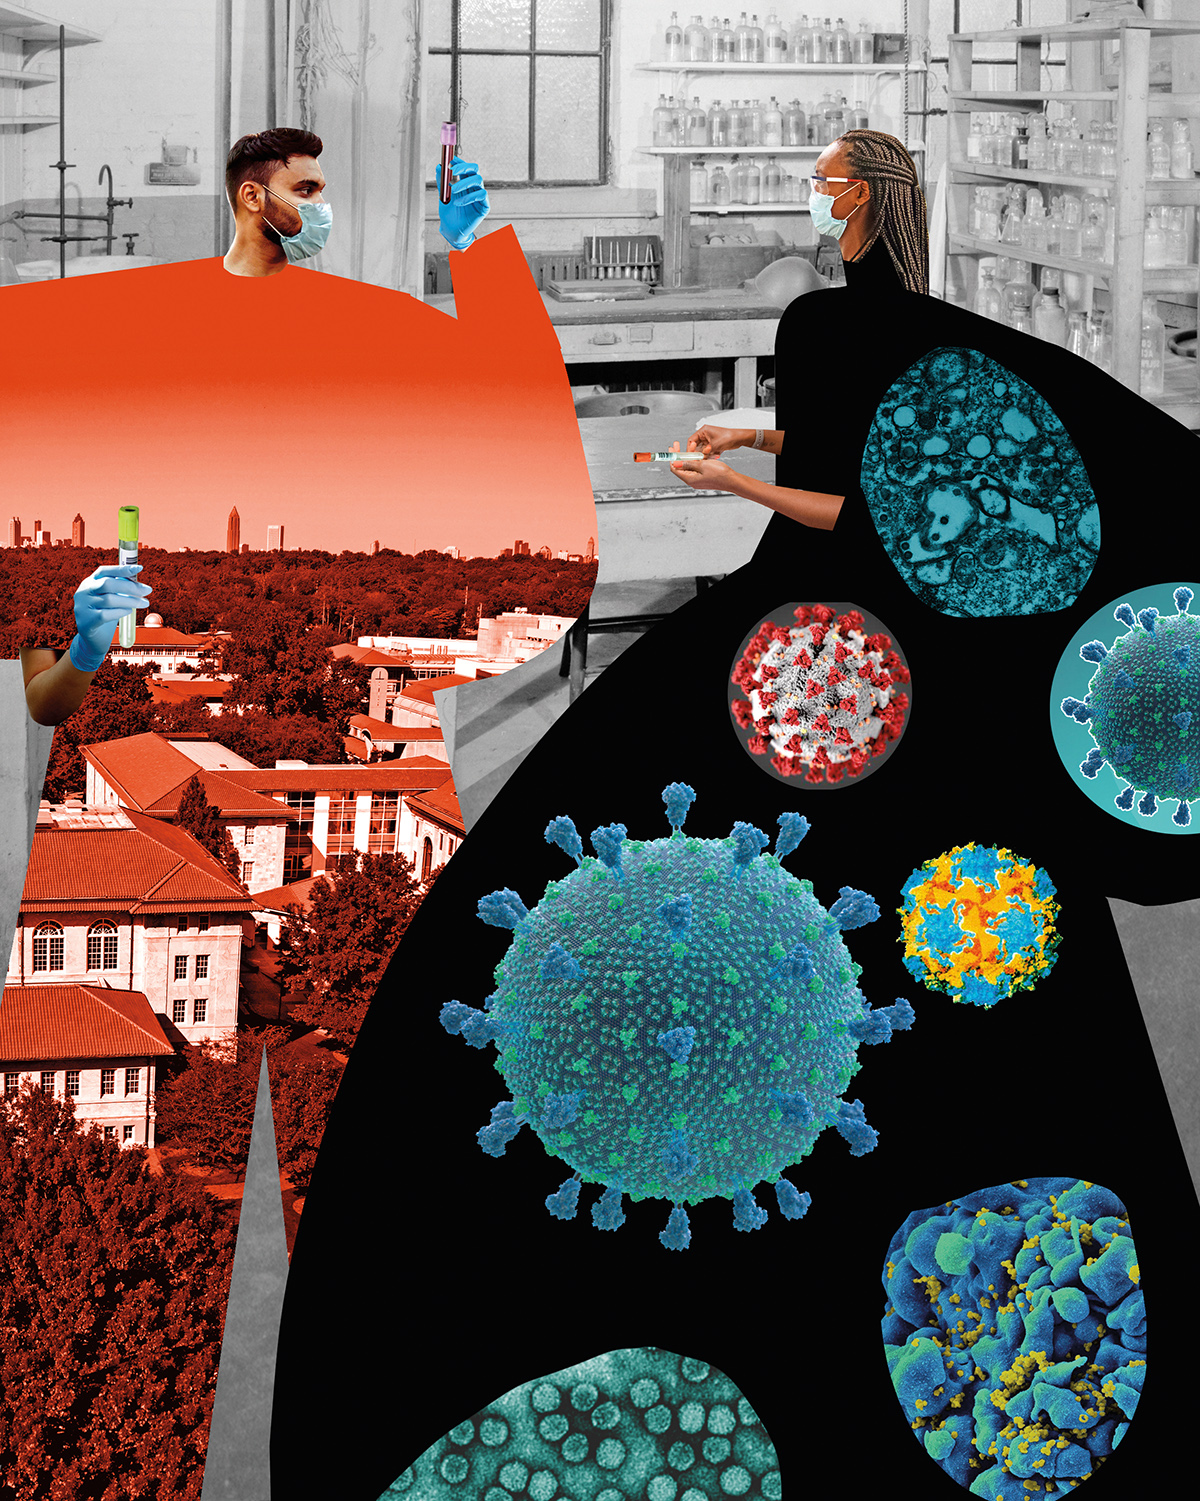 A photo collage featuring masked man and woman in a lab setting. The man's body has been replaced by an orange image of the Emory campus that is vignetted to look like a stylized human body. The woman's body has similarly been replaced with images of the COVID 19 virus.